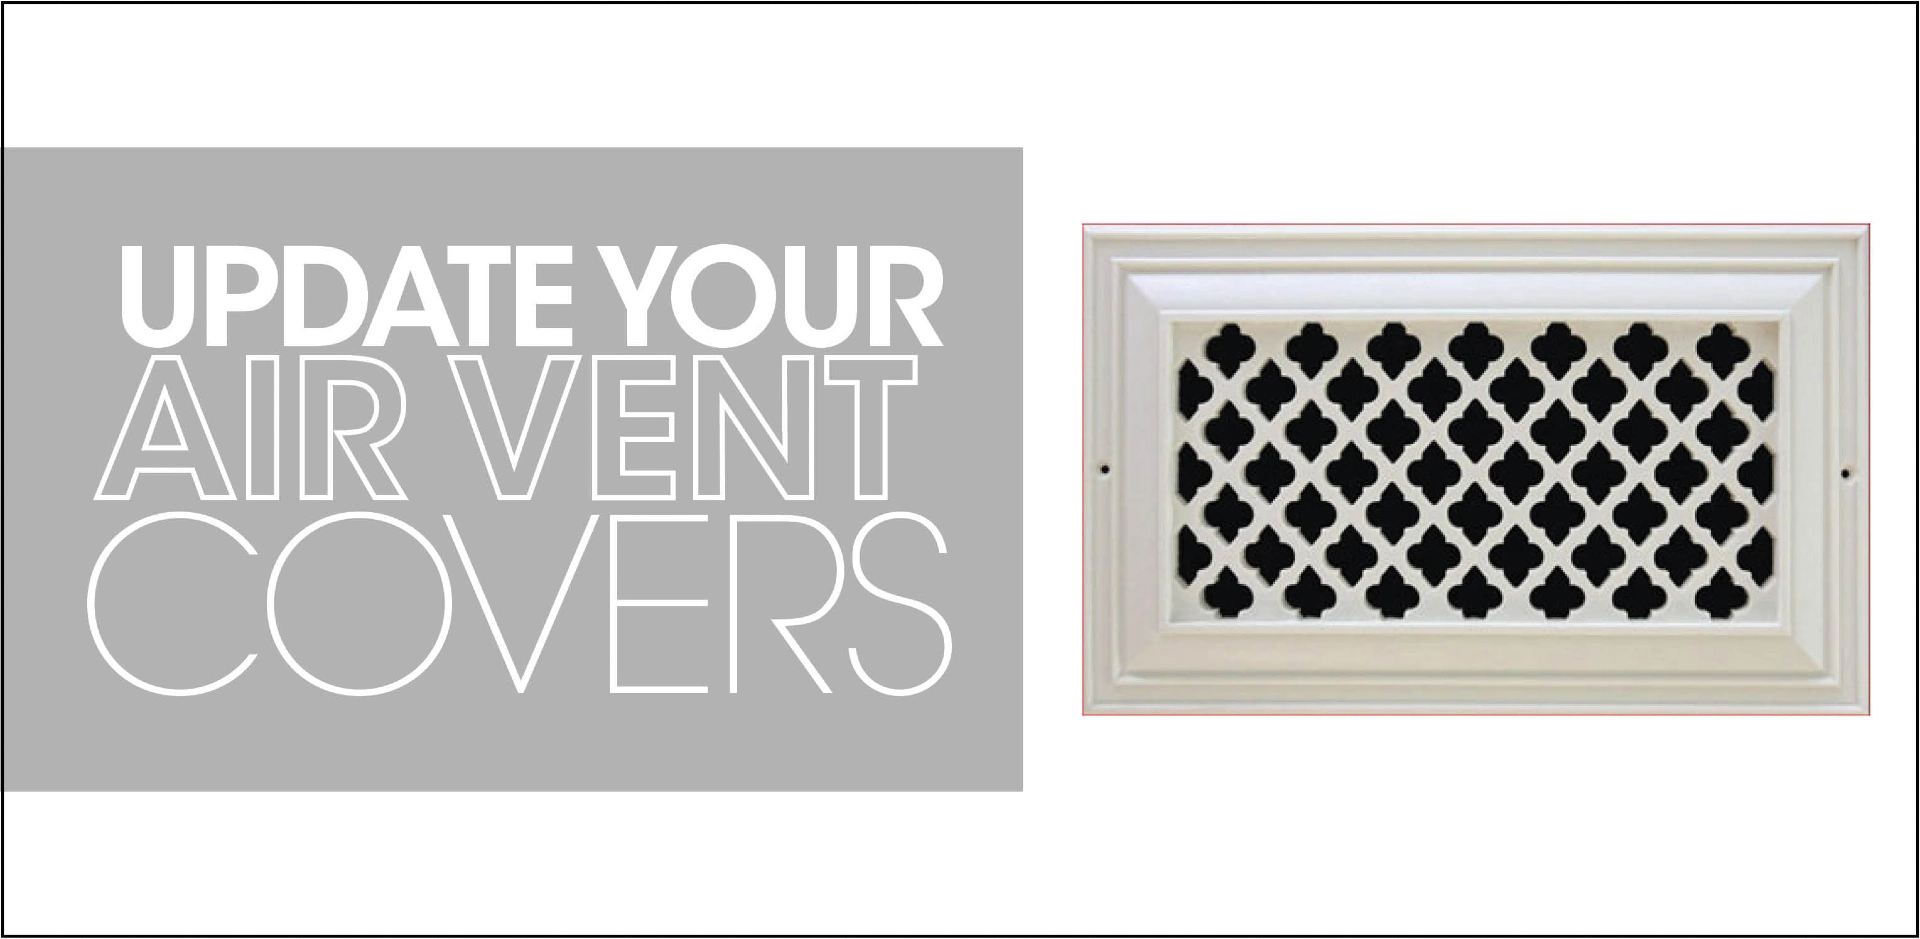 update your air vent covers text and picture of air vent cover